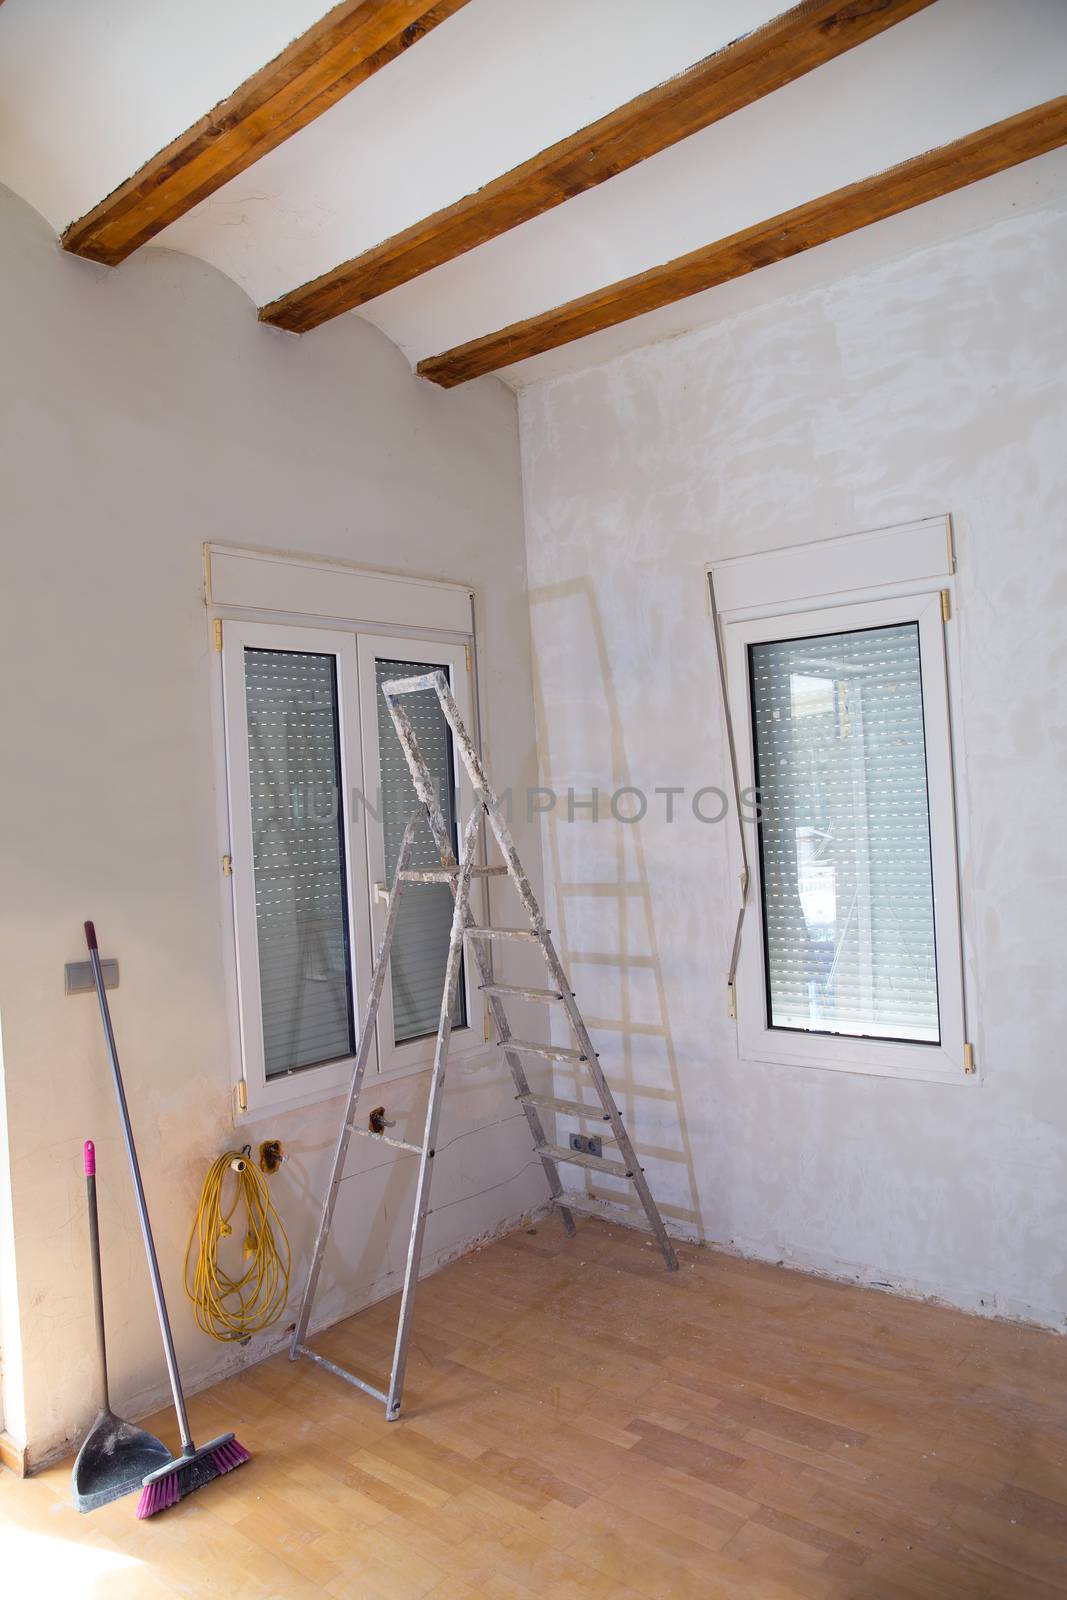 House indoor improvements plater tools and ladder by lunamarina